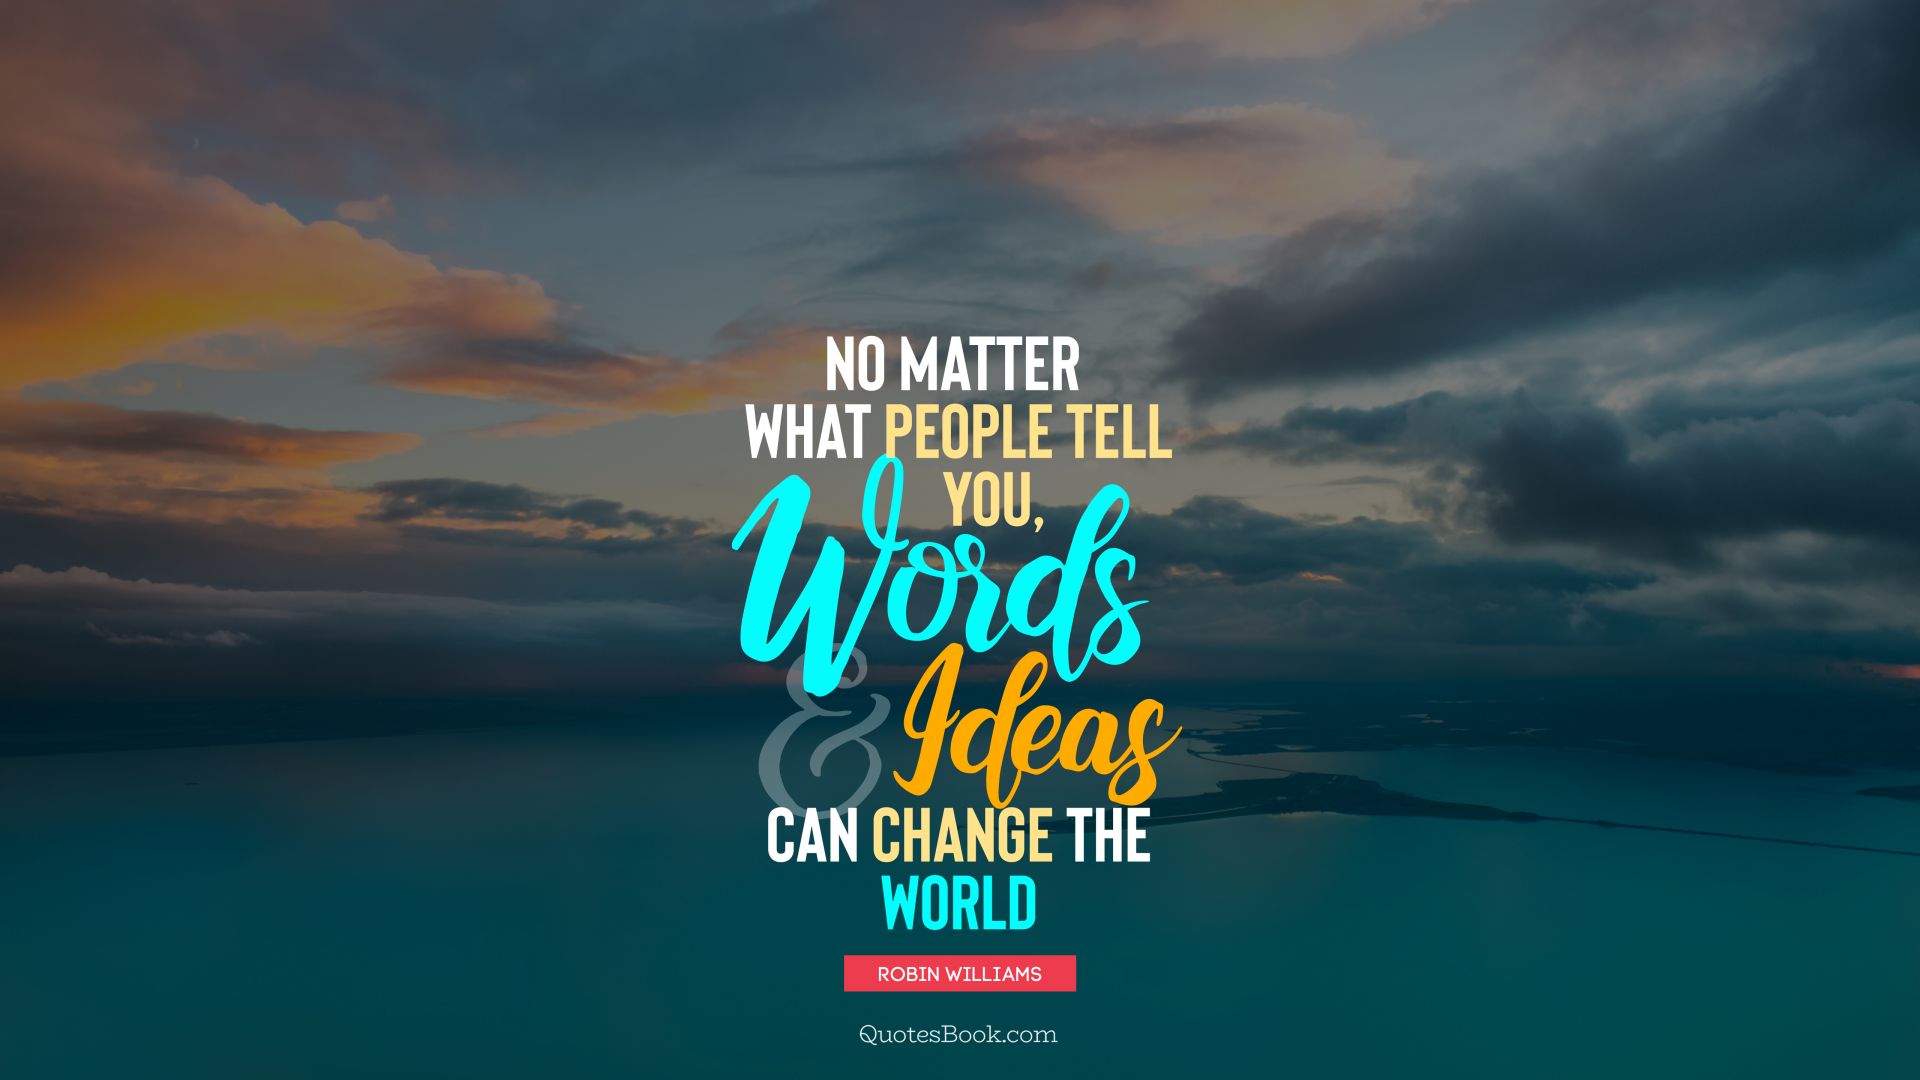 No matter what people tell you, words and ideas can change the world. - Quote by Robin Williams